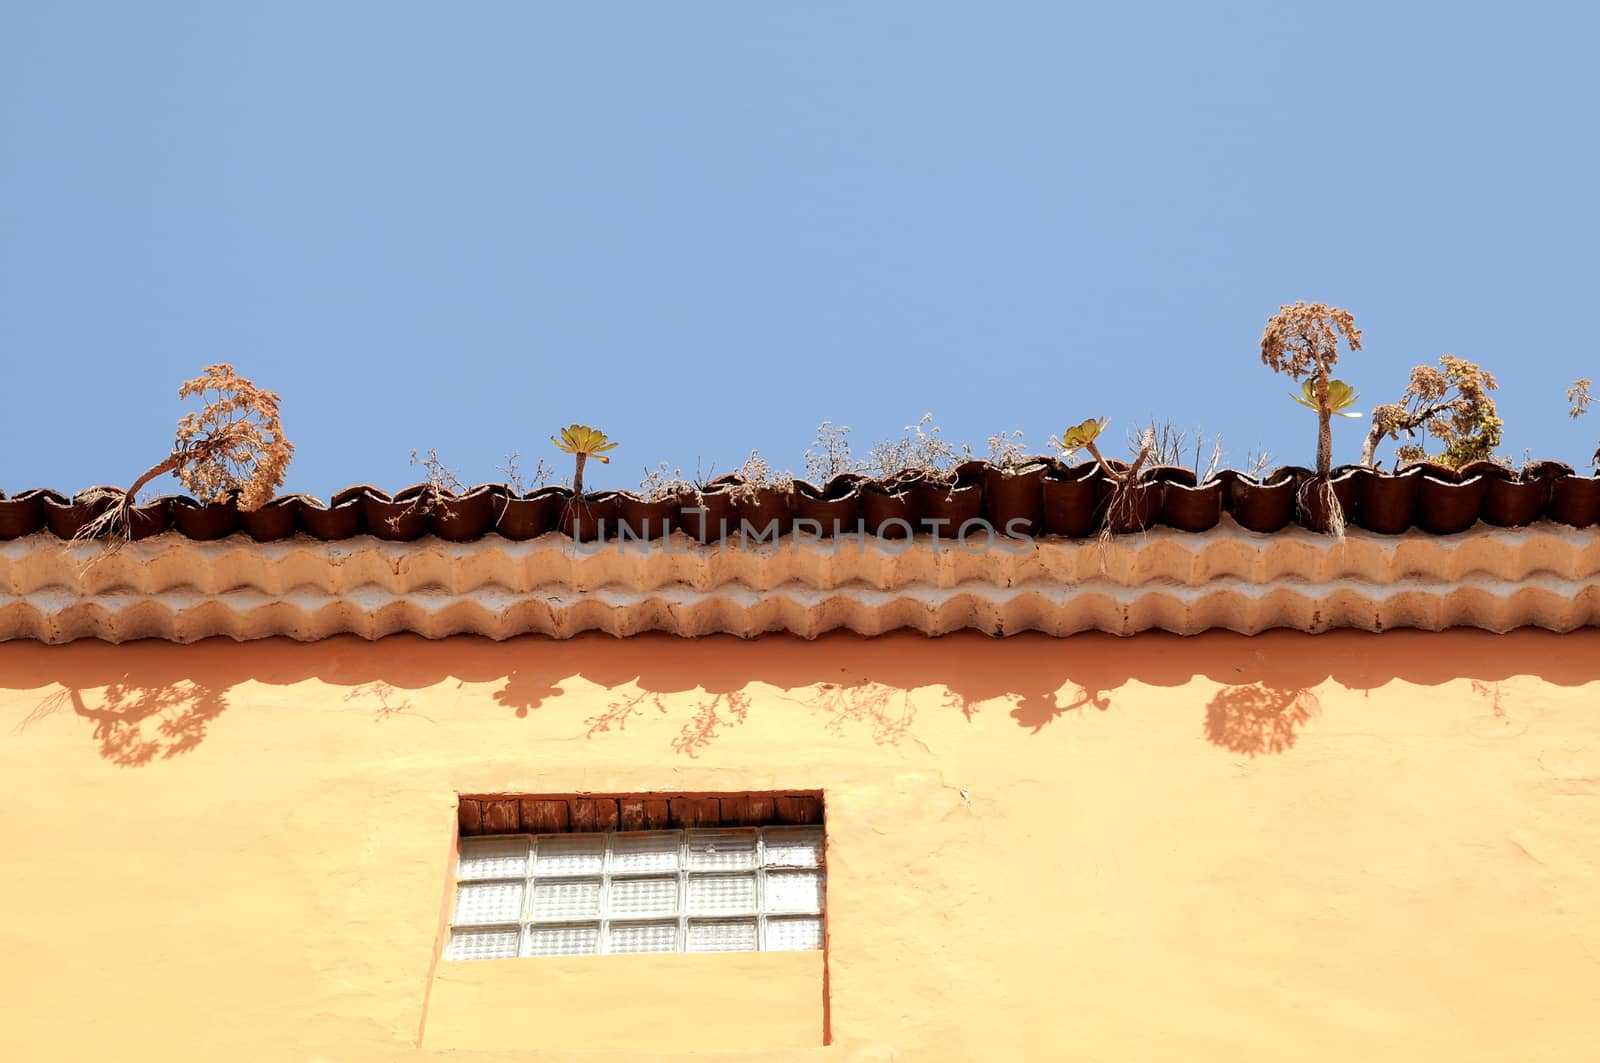 Some Plants Growing over a Roof in Tenerife, Spain